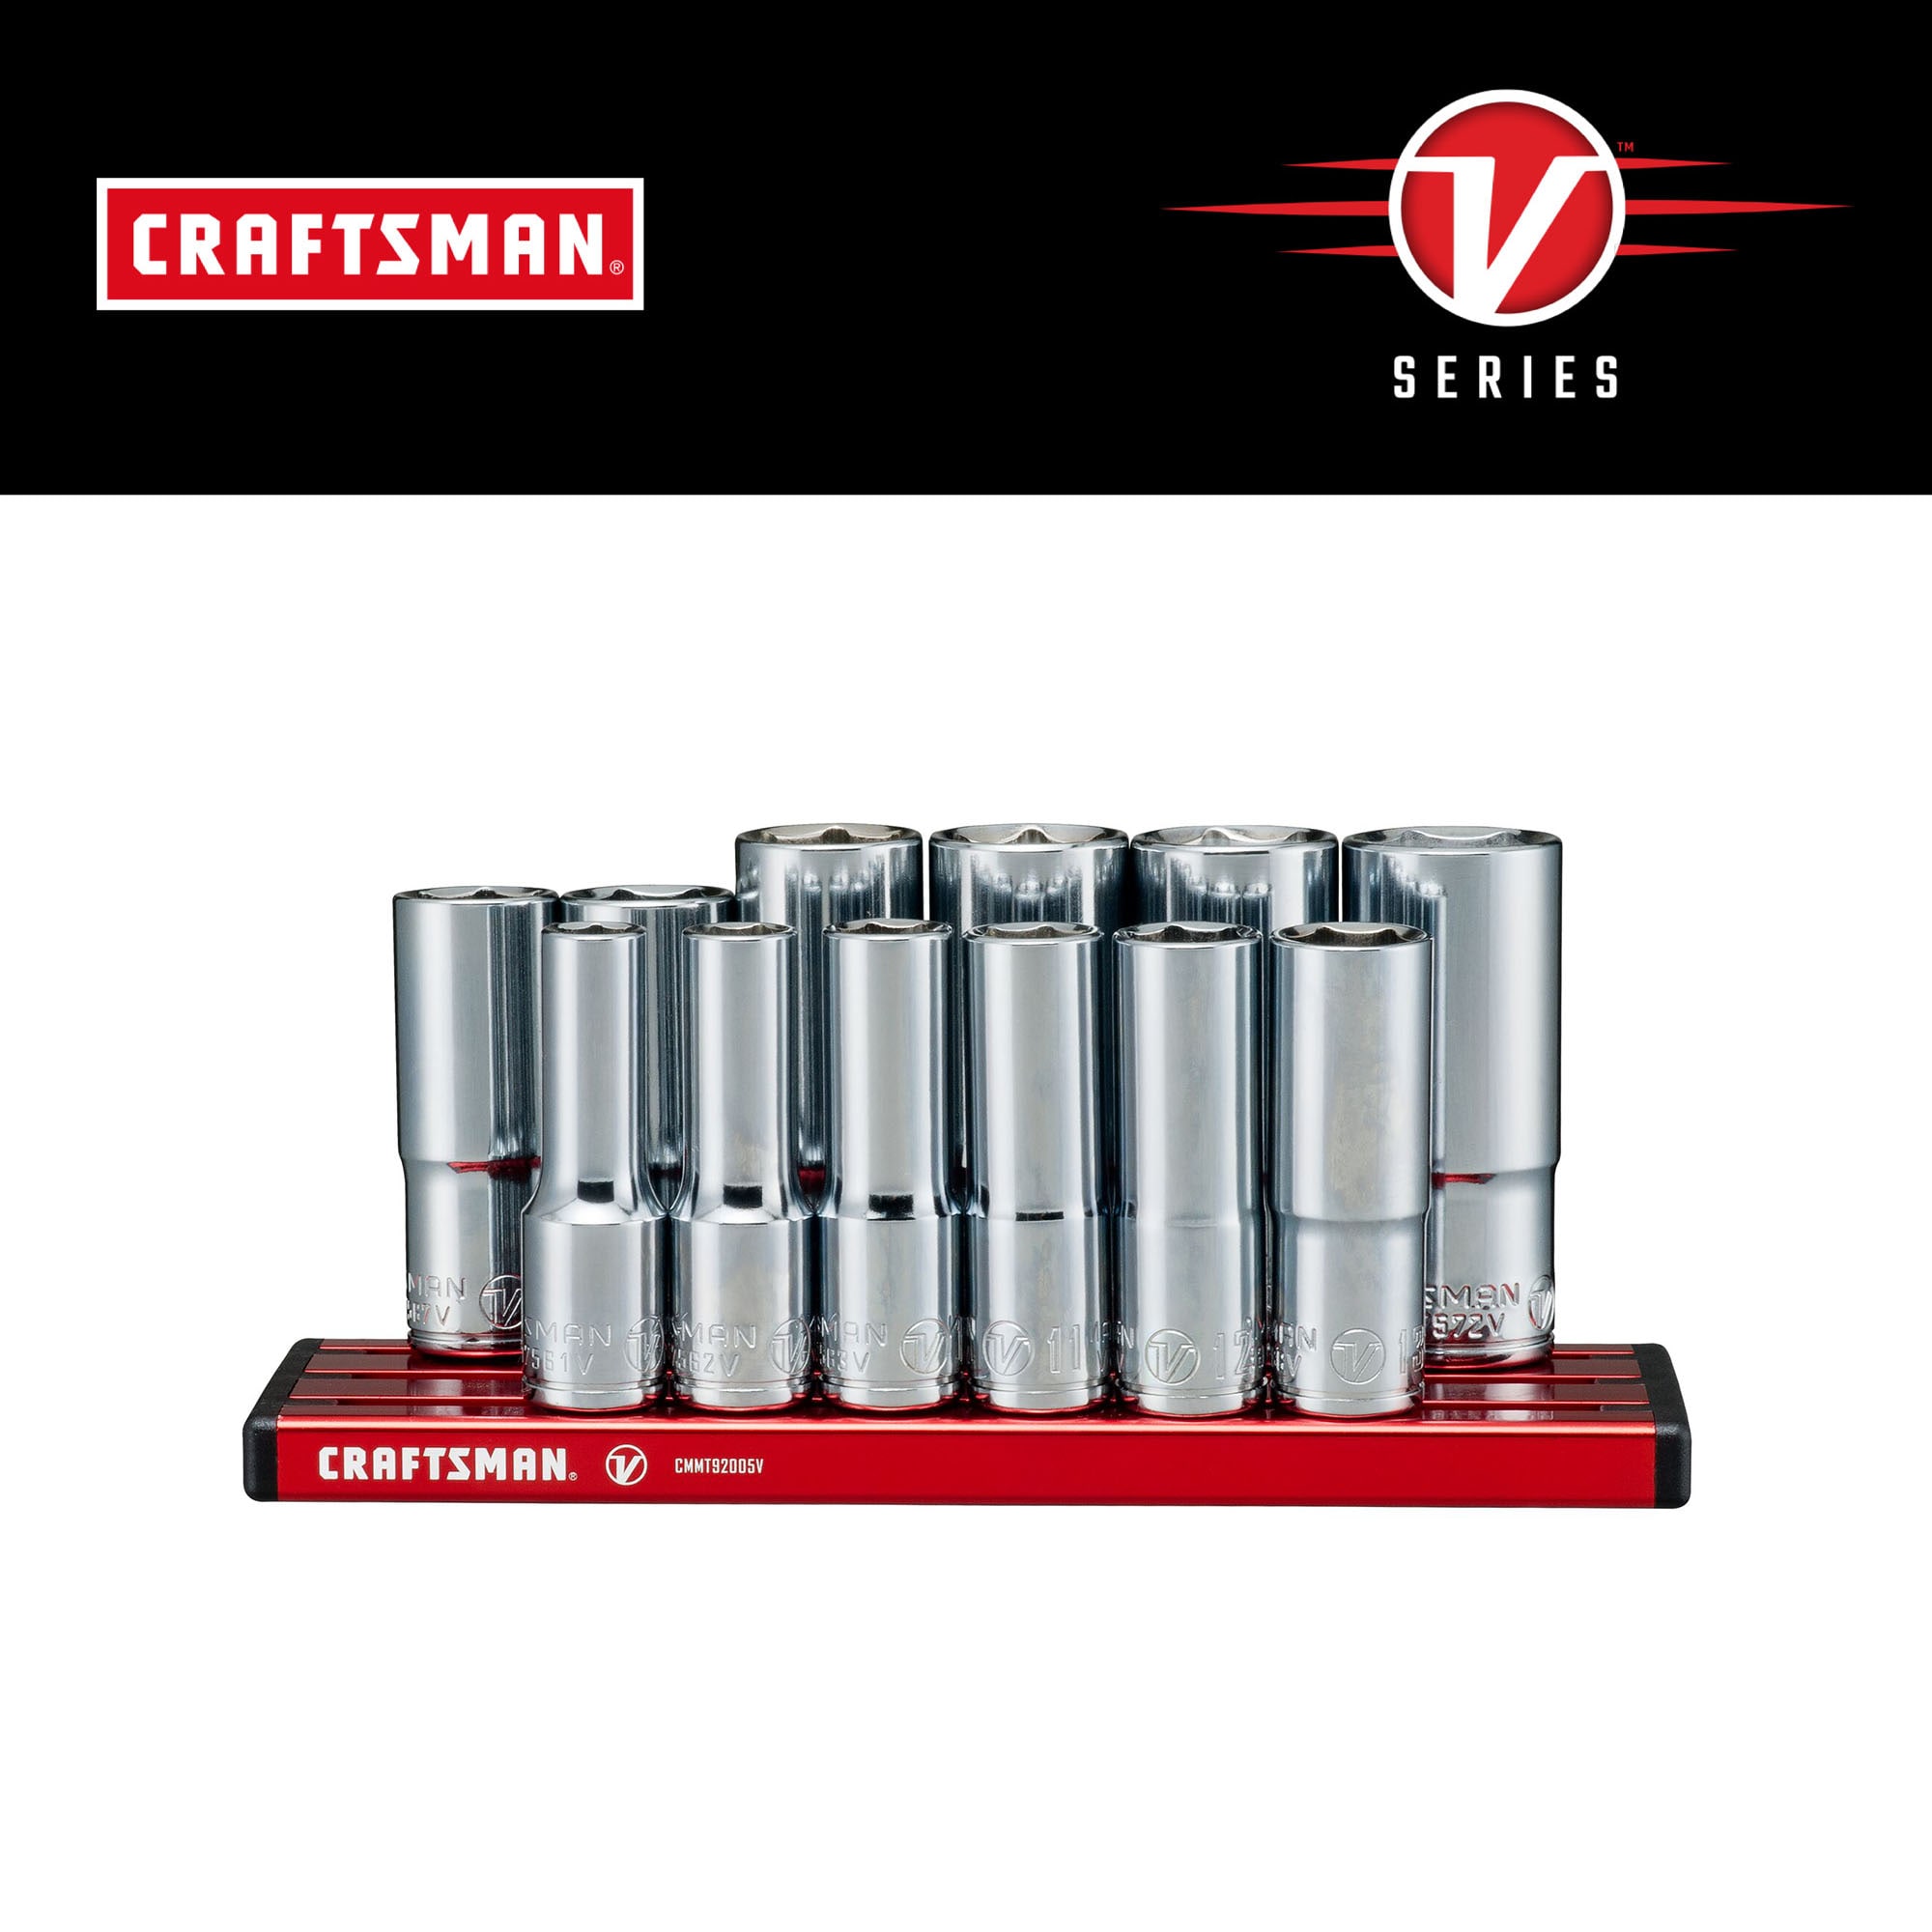 CRAFTSMAN V-Series 12-Piece Metric 3/8-in Drive 6-point Set Deep